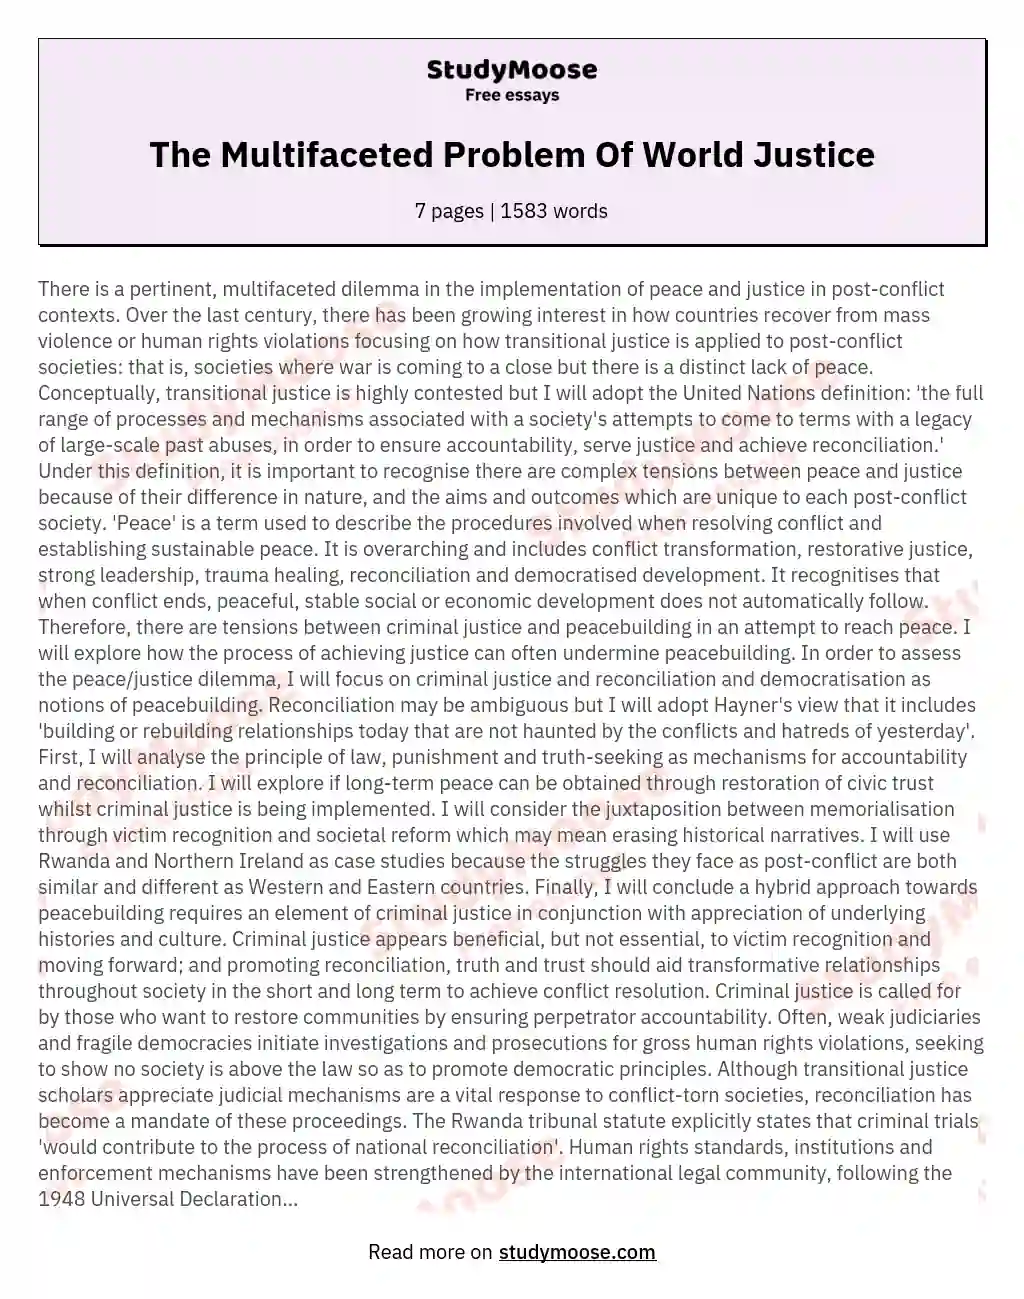 The Multifaceted Problem Of World Justice essay